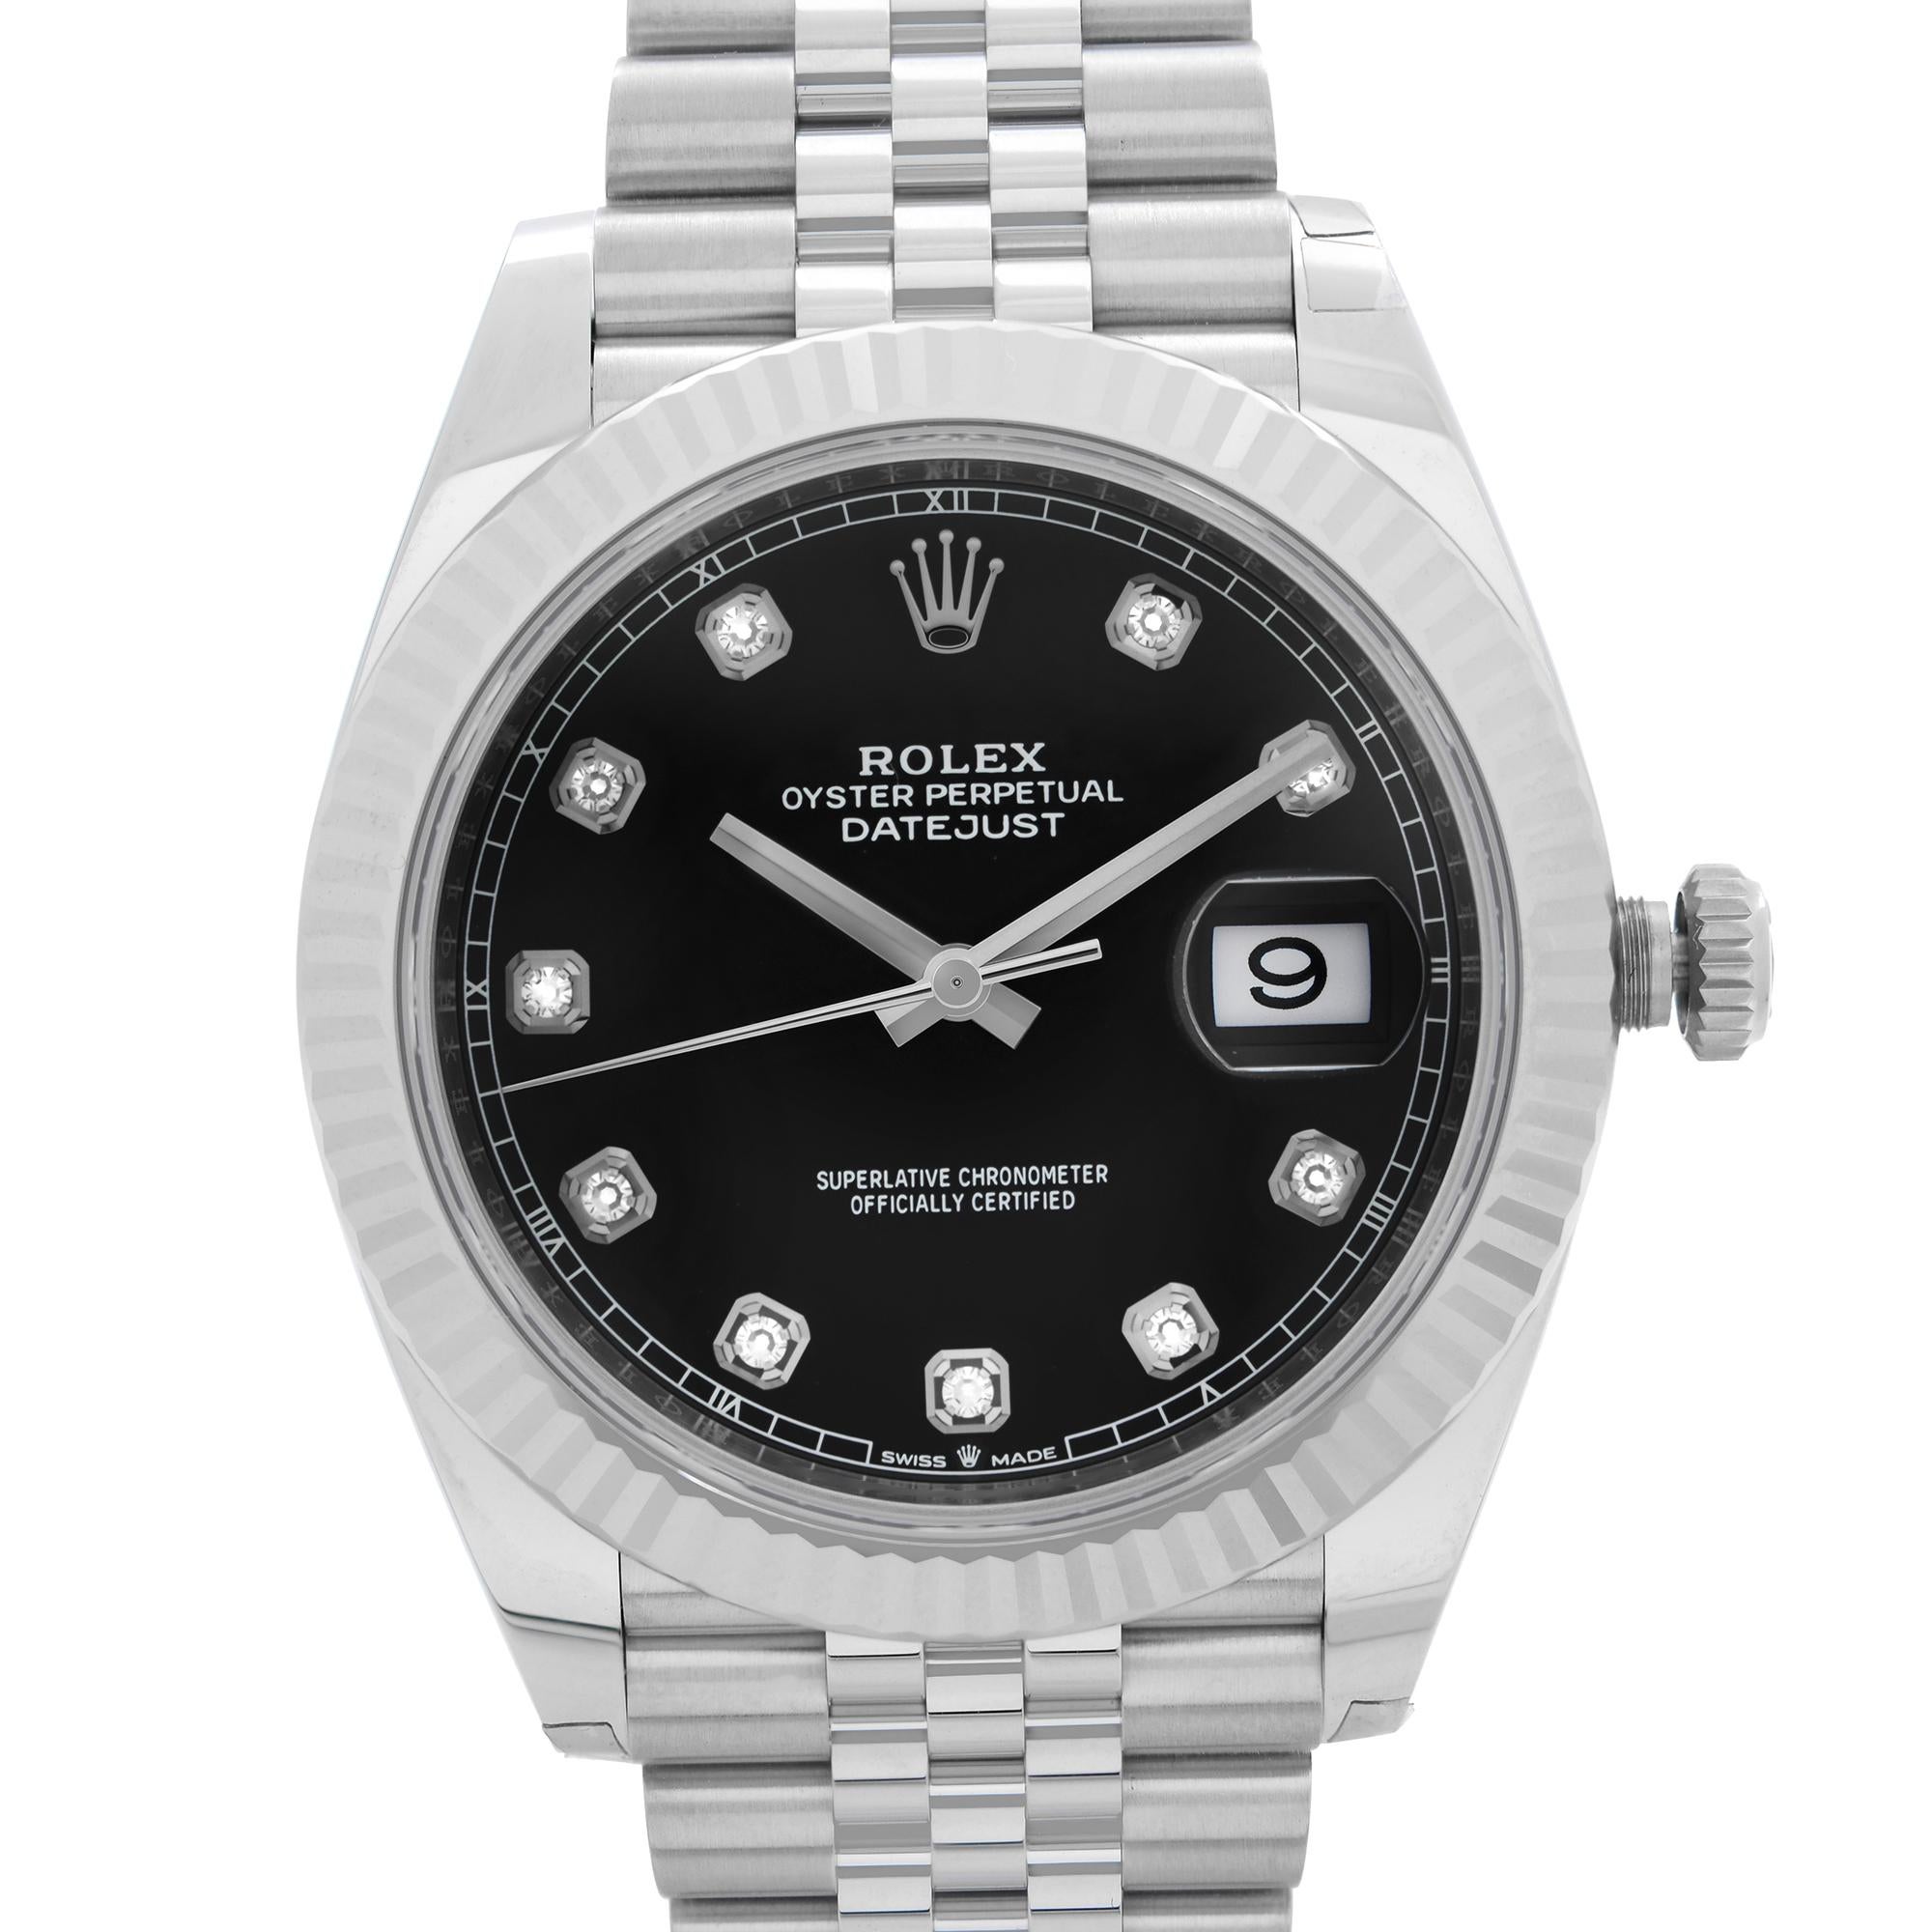 Unworn 2023 Card. Box and papers included. 5-year warranty. 

Brand and Model Information:
Brand: Rolex
Model: Rolex Datejust 126334
Type, Style, and Manufacturing:

Type: Wristwatch
Style: Luxury
Department: Men
Country/Region of Manufacture: